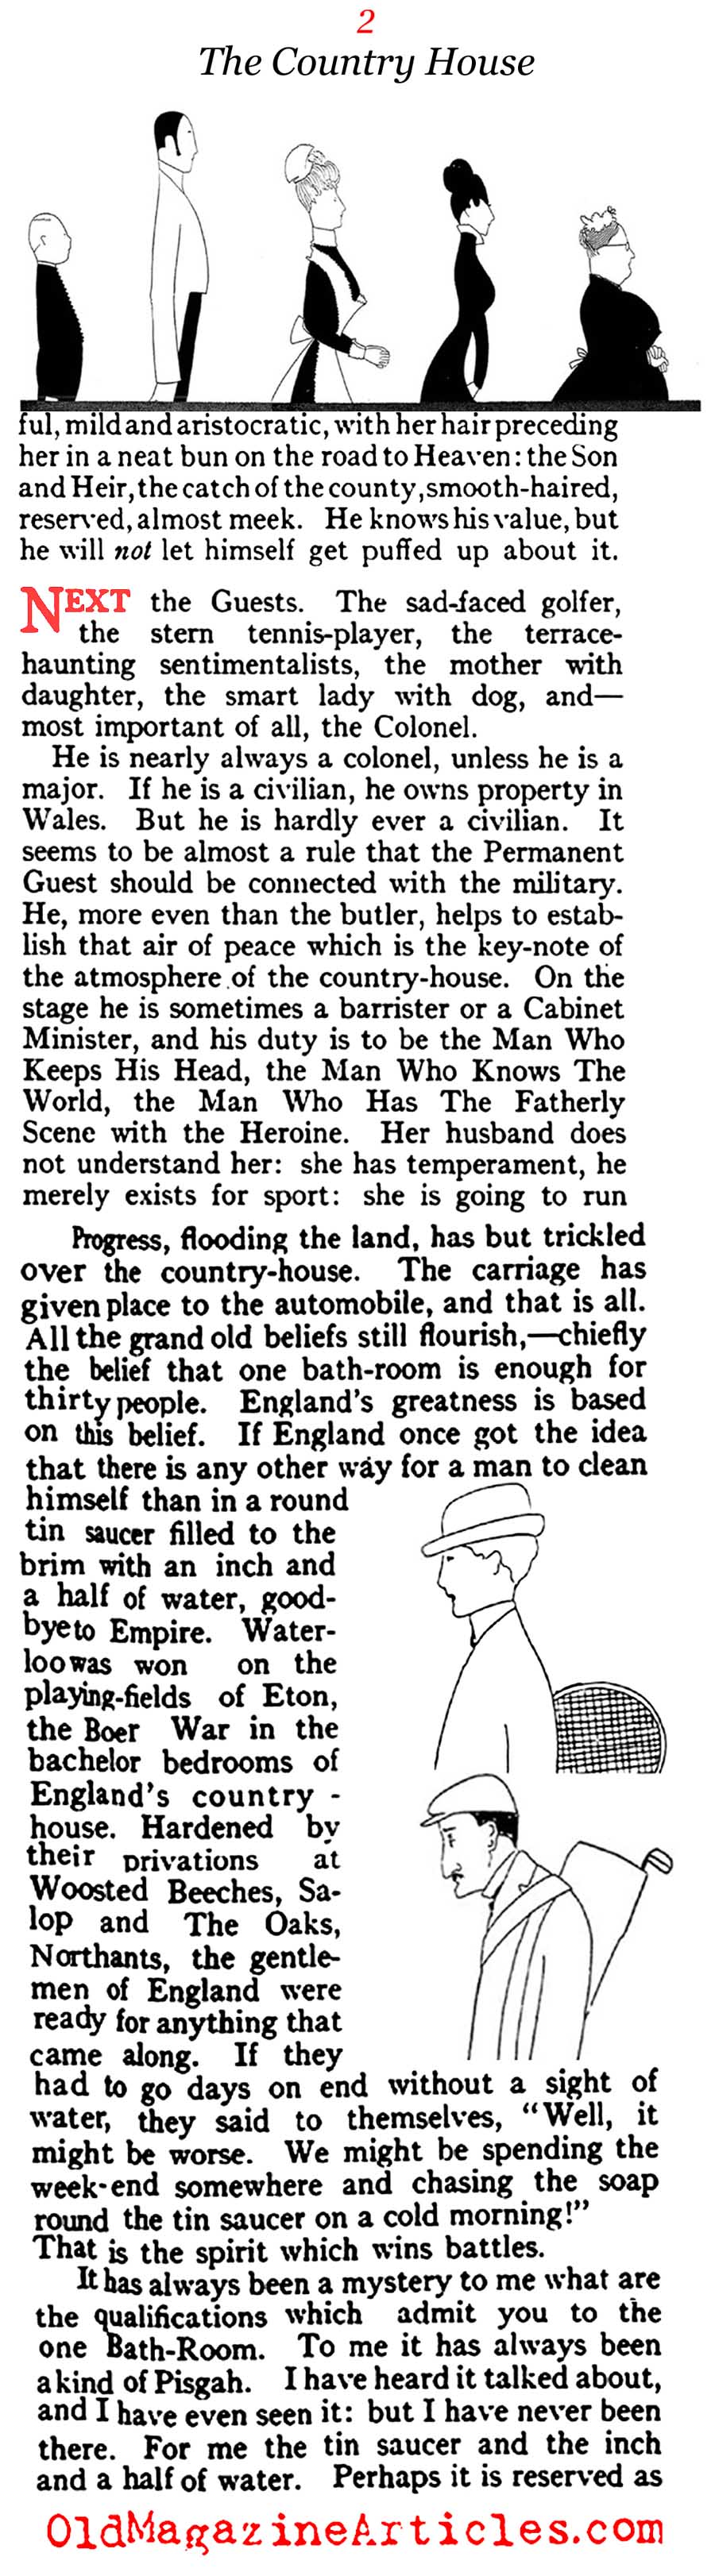 The English Country House: What Good Is It?  (Vogue Magazine, 1914)